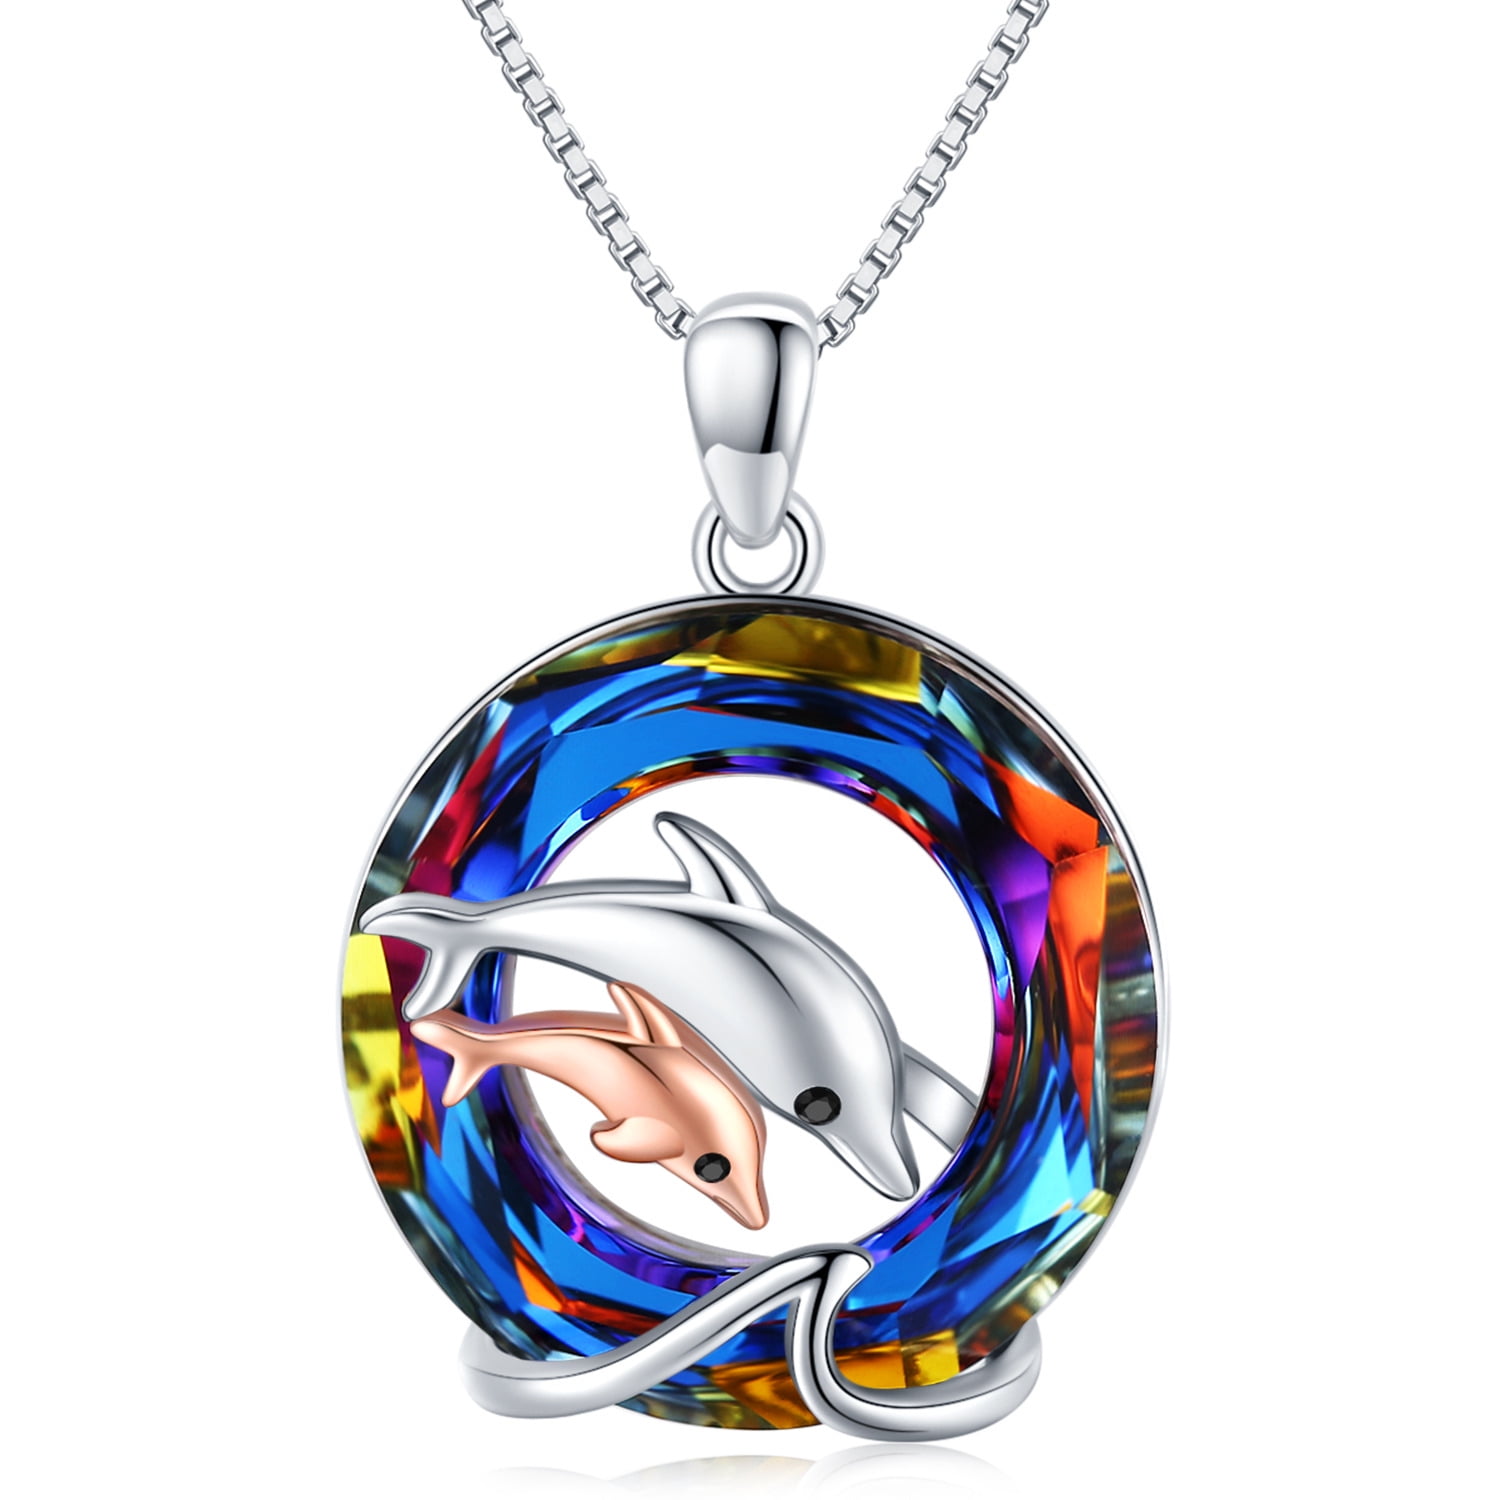 Dolphin charm On Silver Plated Hypo Allergenic Necklace Childrens Jewellery 